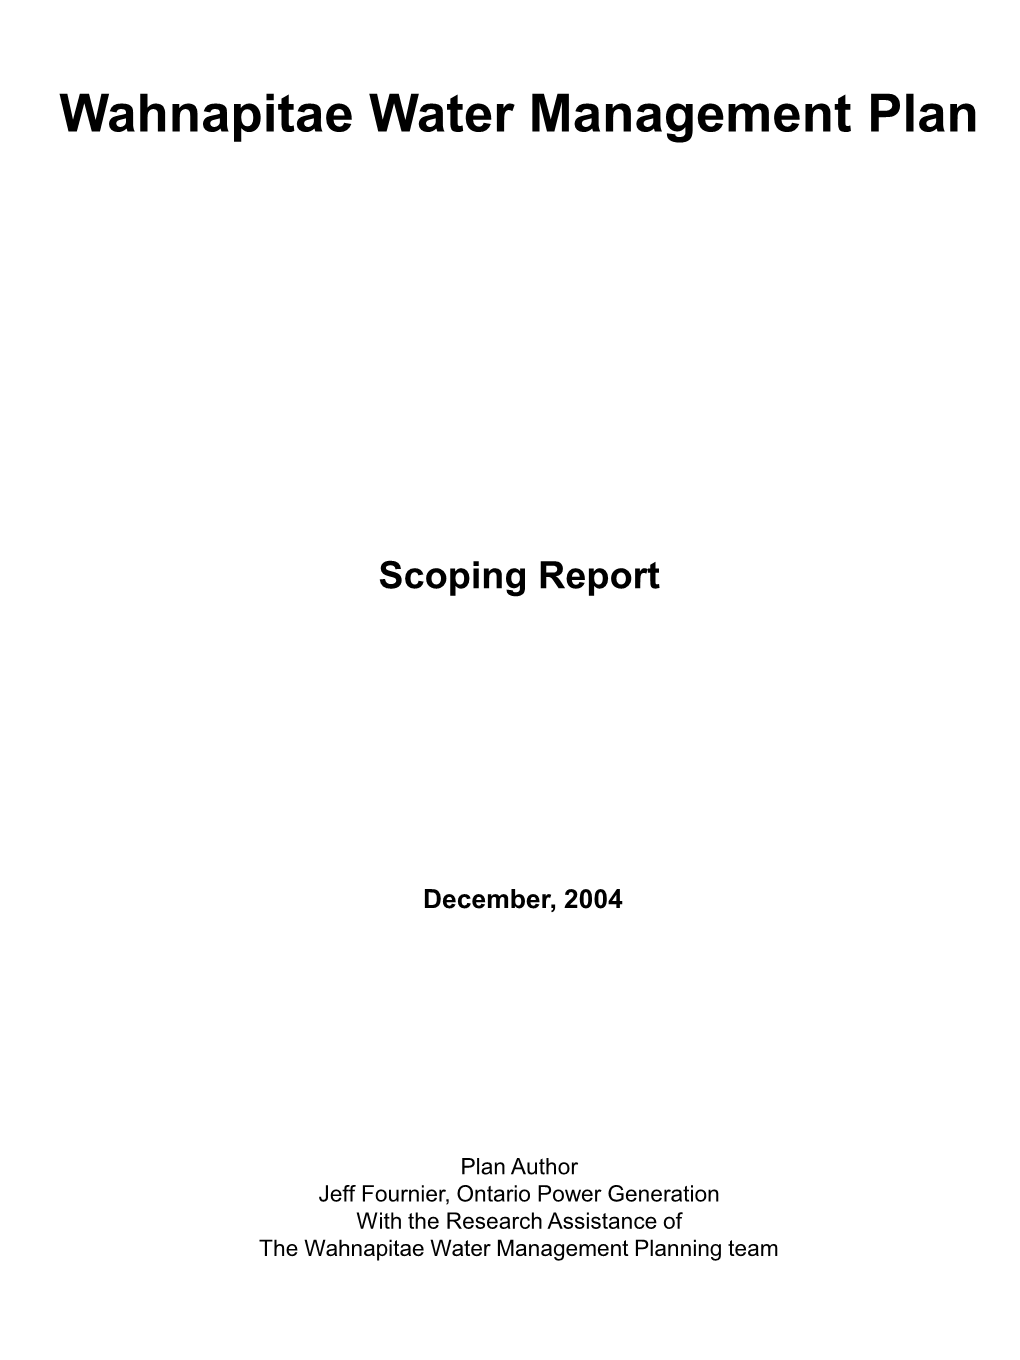 Scoping Report by Ontario Power Generation